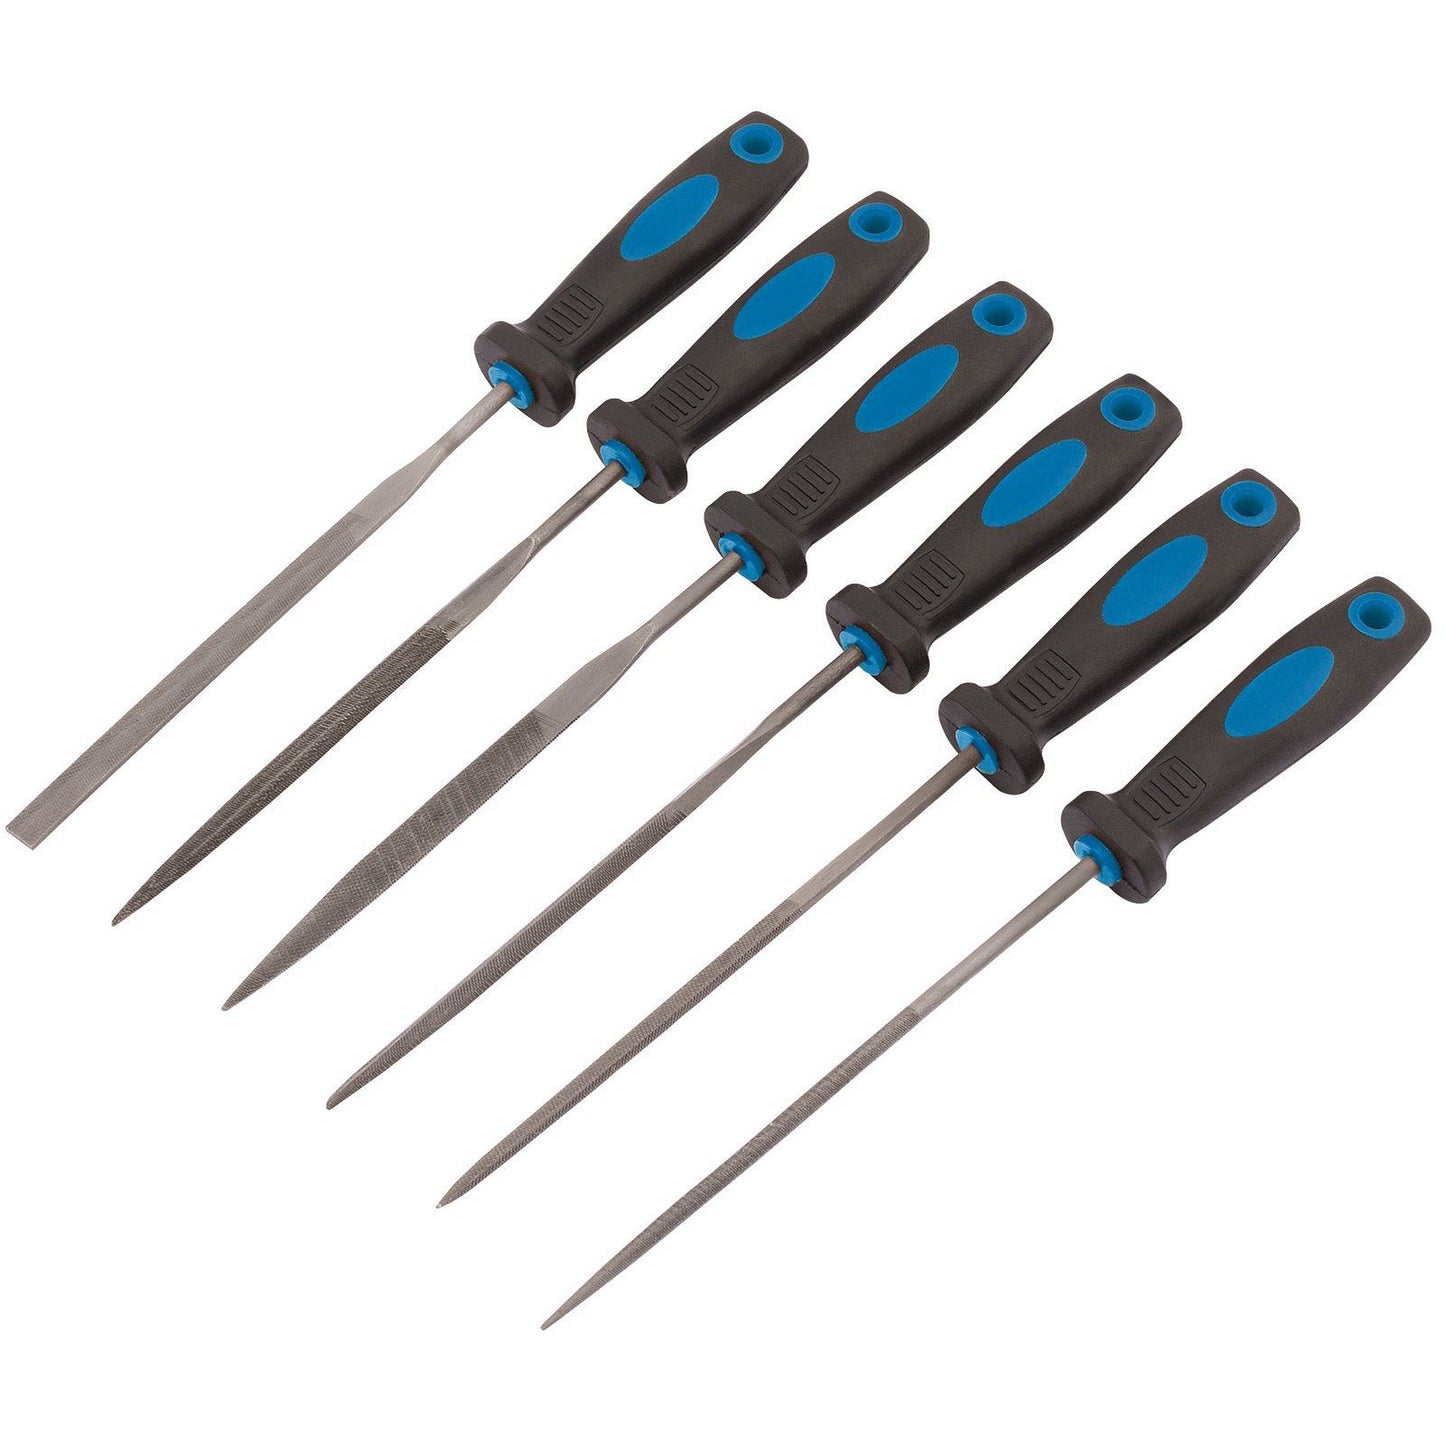 Draper Needle File Set High Carbon For Metalwork Soft Grip Jewellers Micro Small - 83480